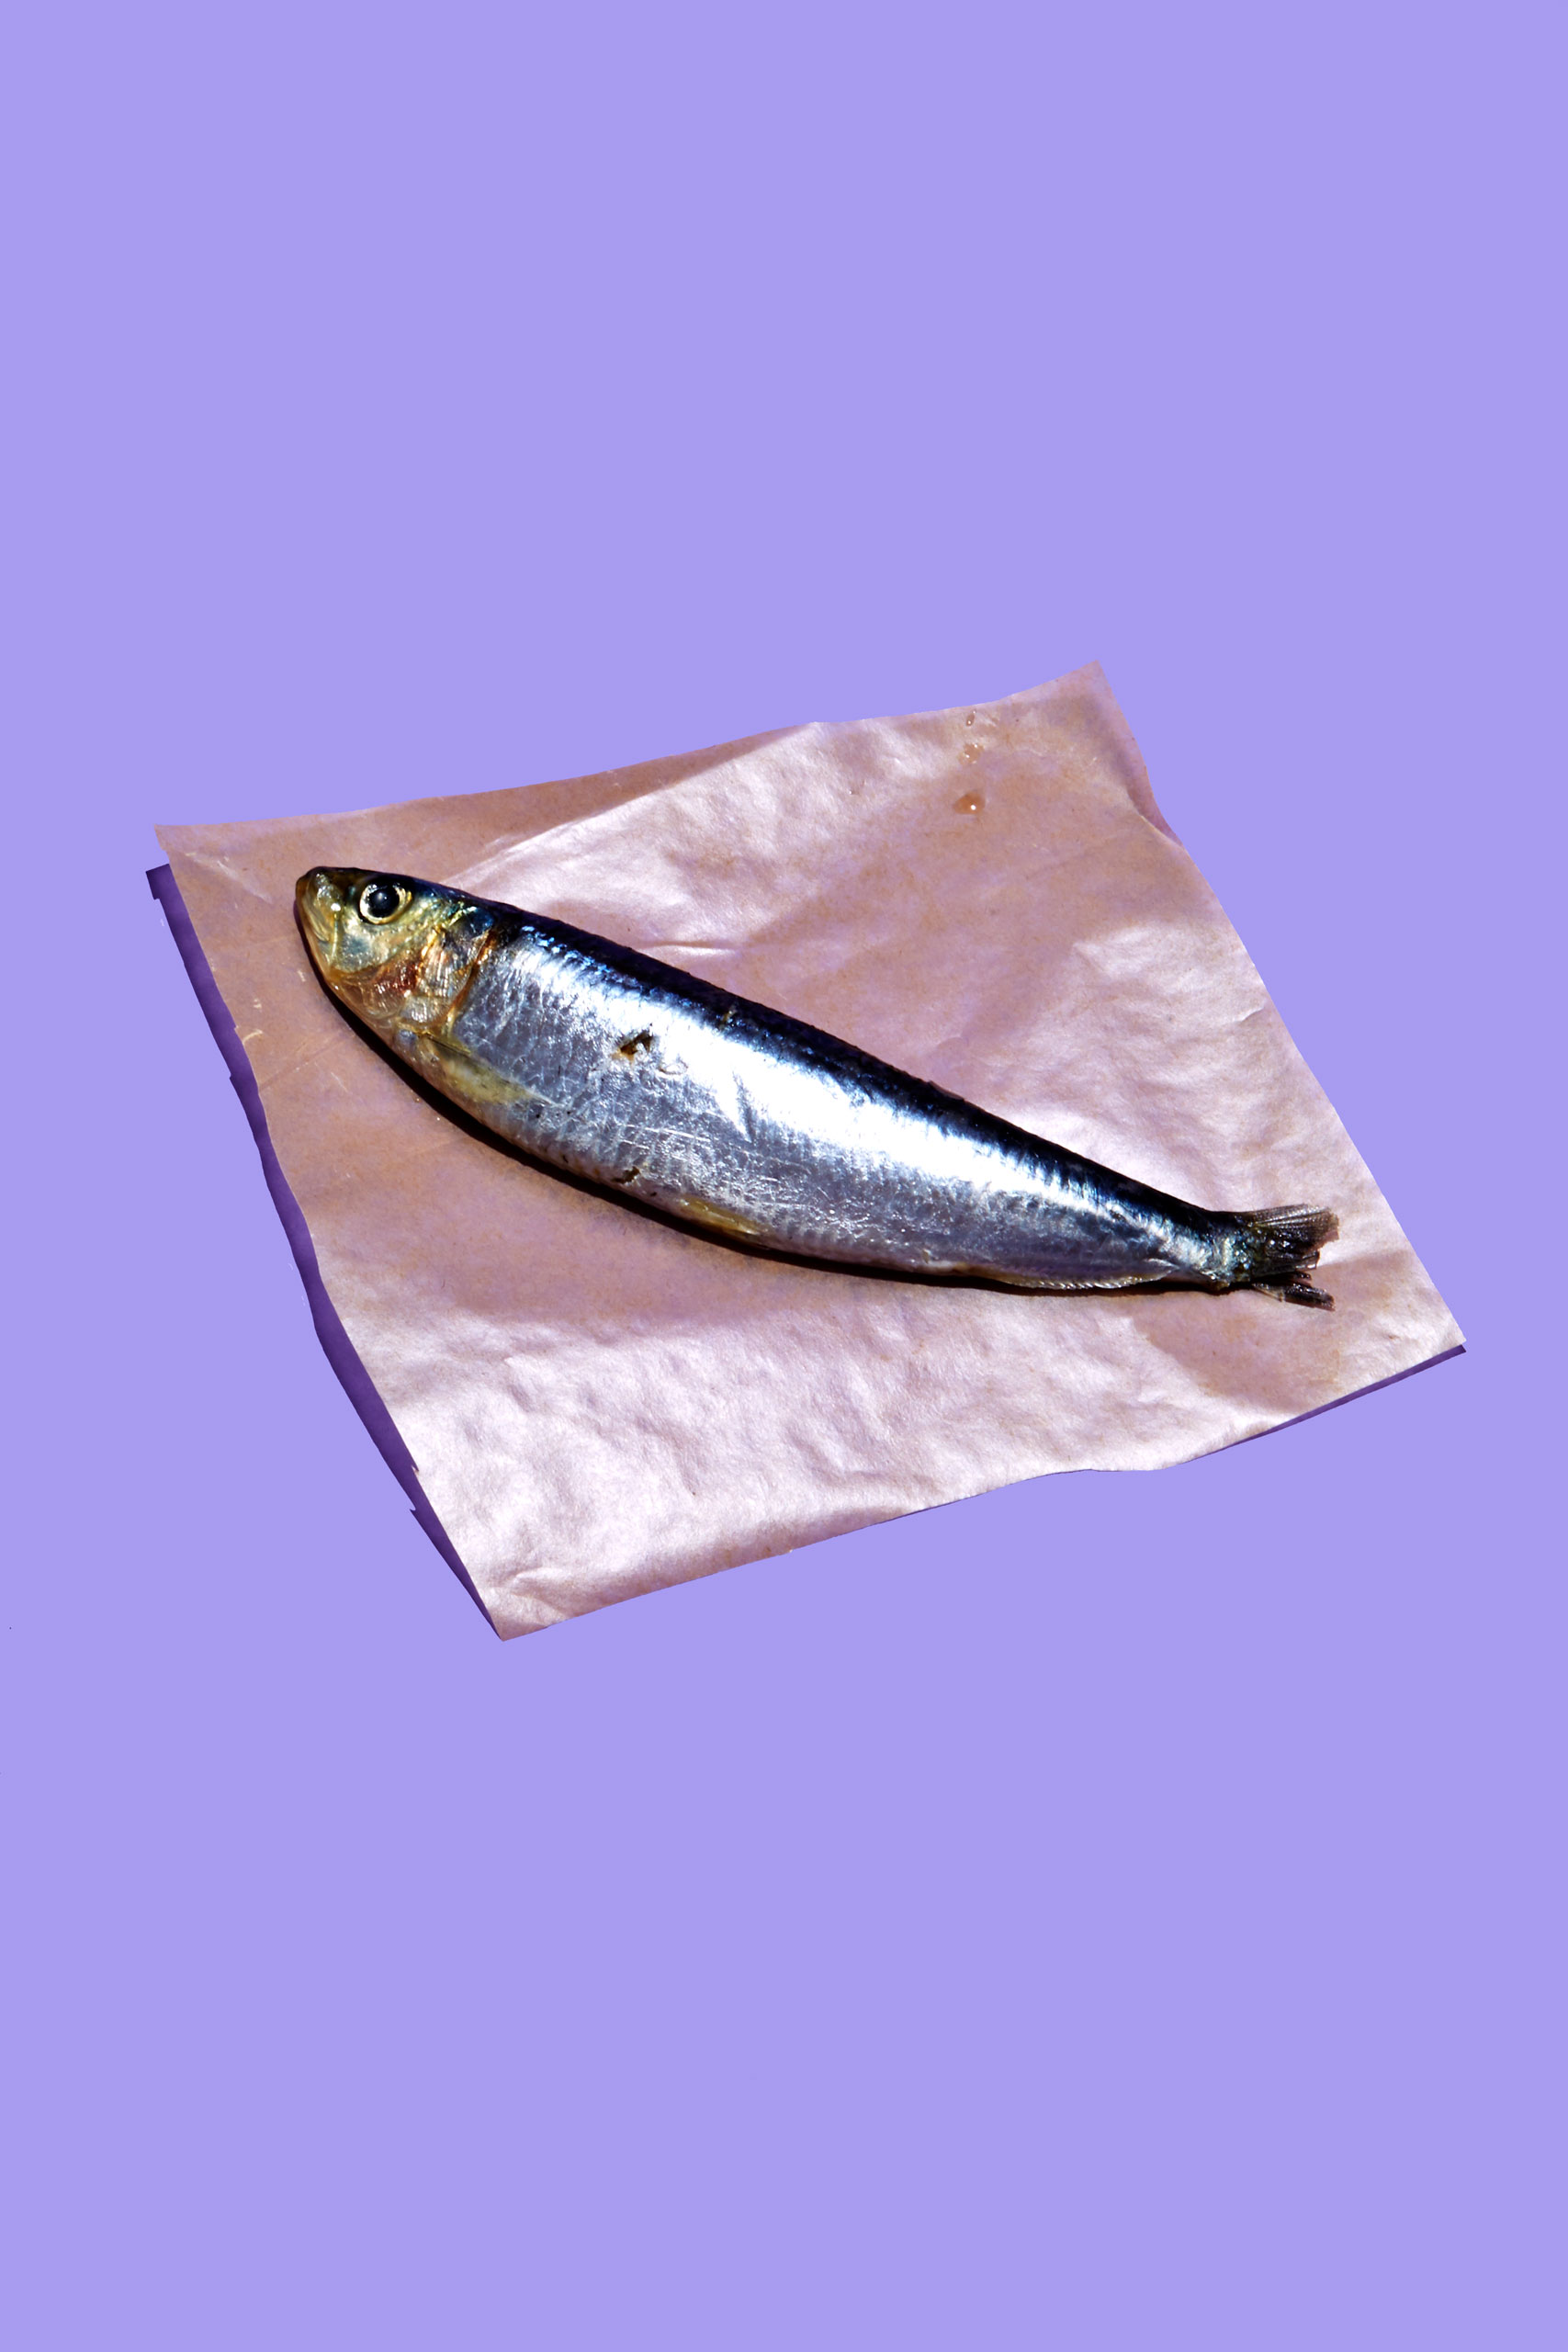 healthiest foods, health food, diet, nutrition, time.com stock, sardines, fish, protein